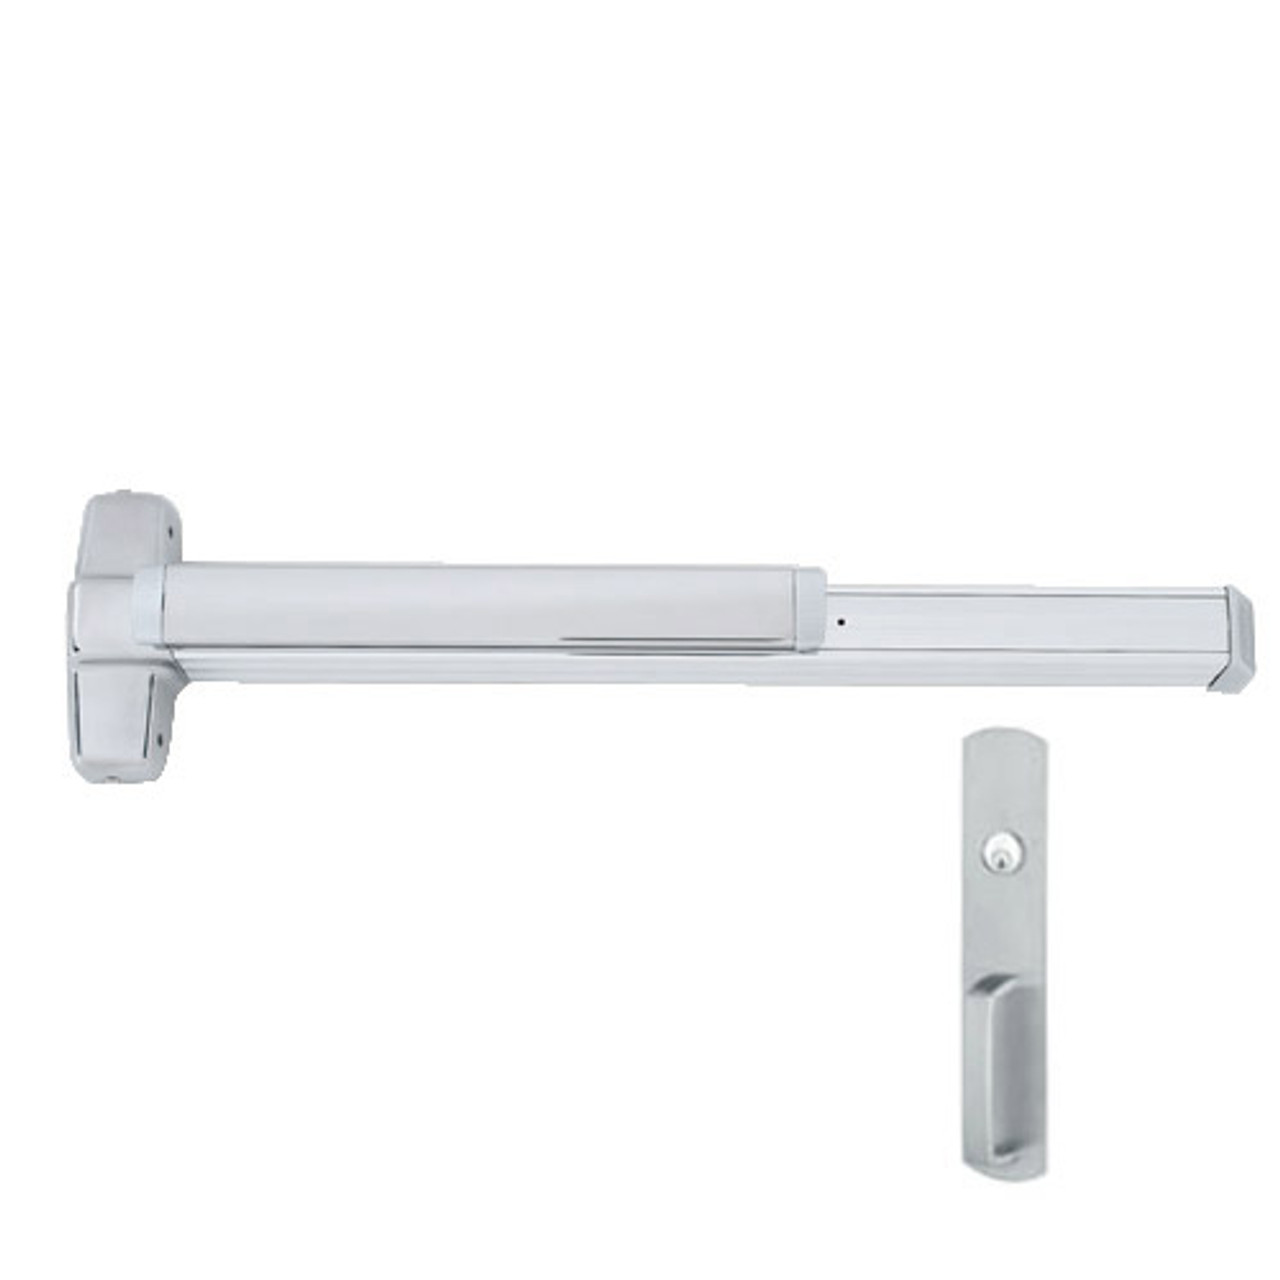 QEL9847WDC-NL-US28-3 Von Duprin Exit Device with Quiet Electric Latch in Anodized Aluminum